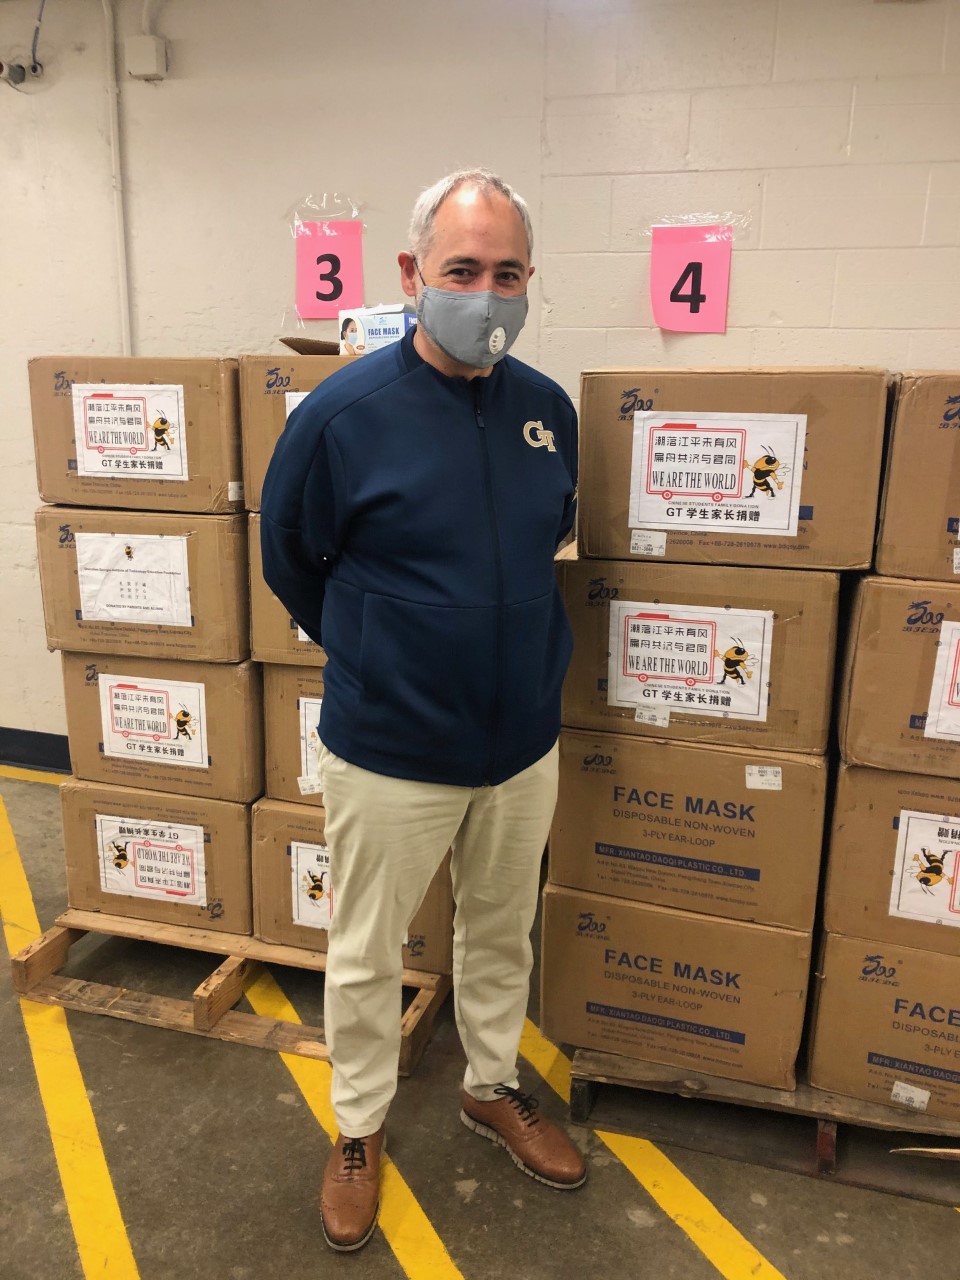 President Cabrera said he was "grateful to the families of Georgia Tech students from China, and other friends and supporters, for their generous donation" of personal protective equipment.